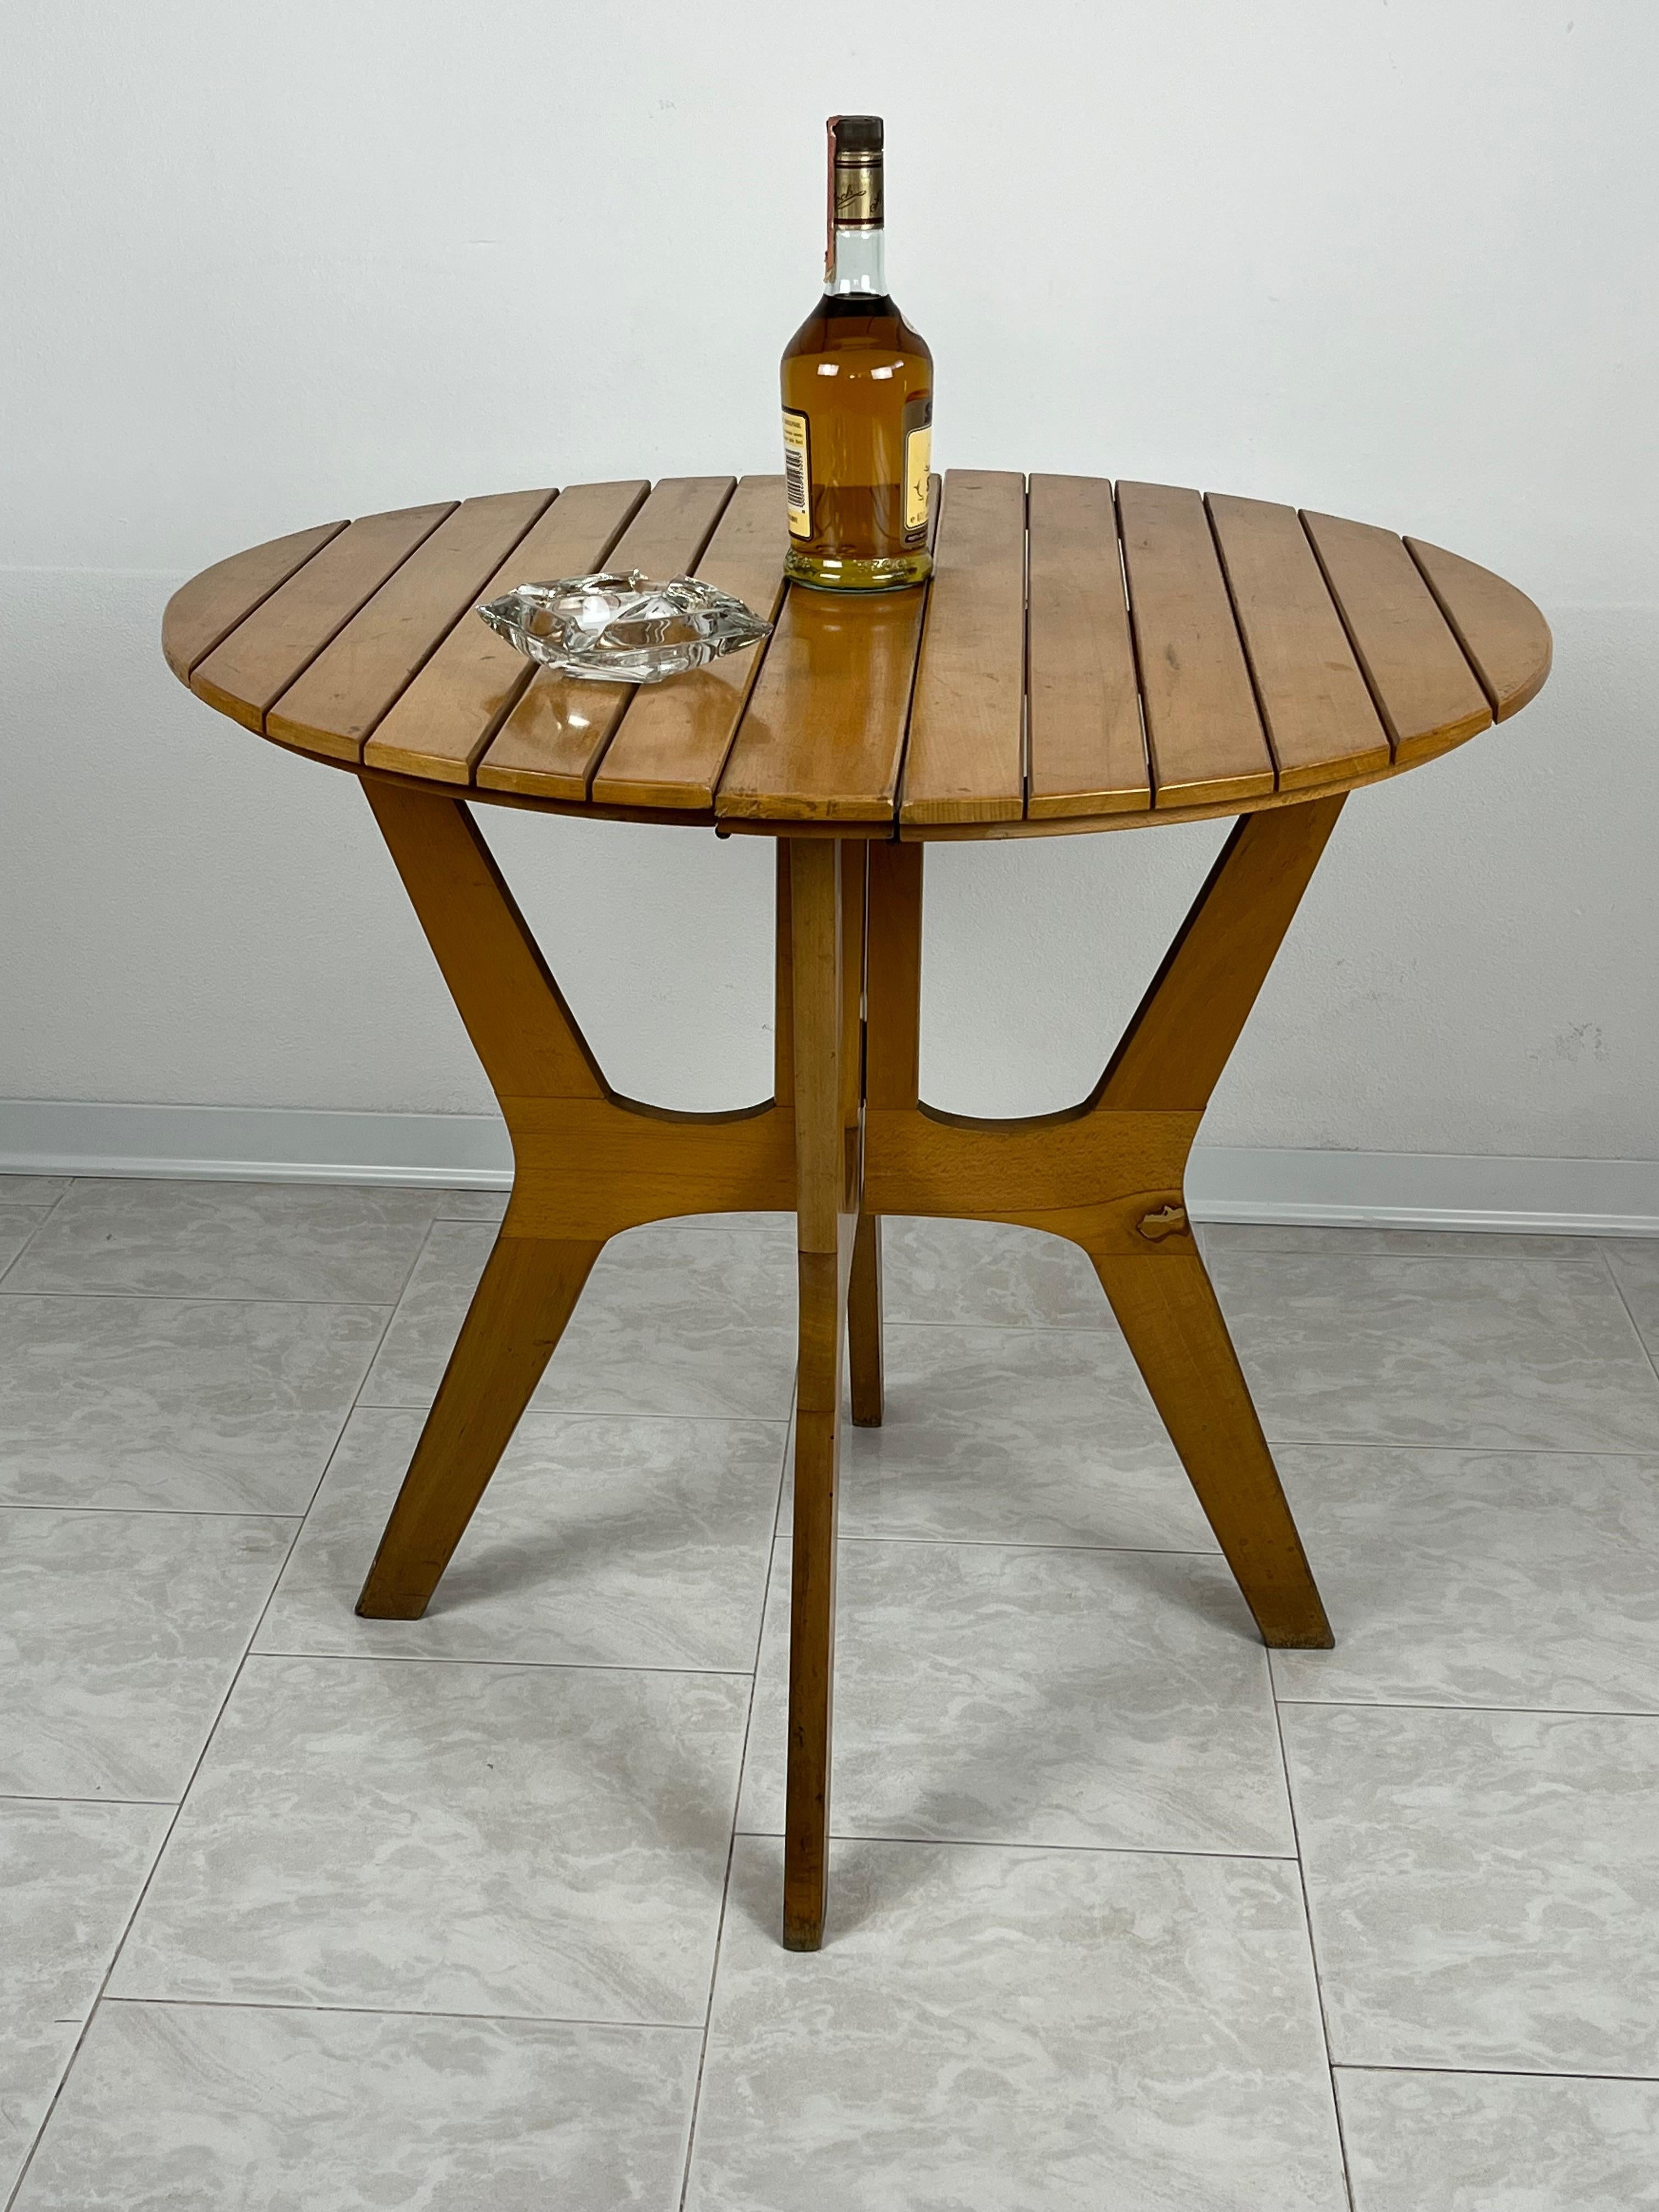 Late 20th Century Folding Table in Maple Wood, Fada Asiago, Italy, 1976 For Sale